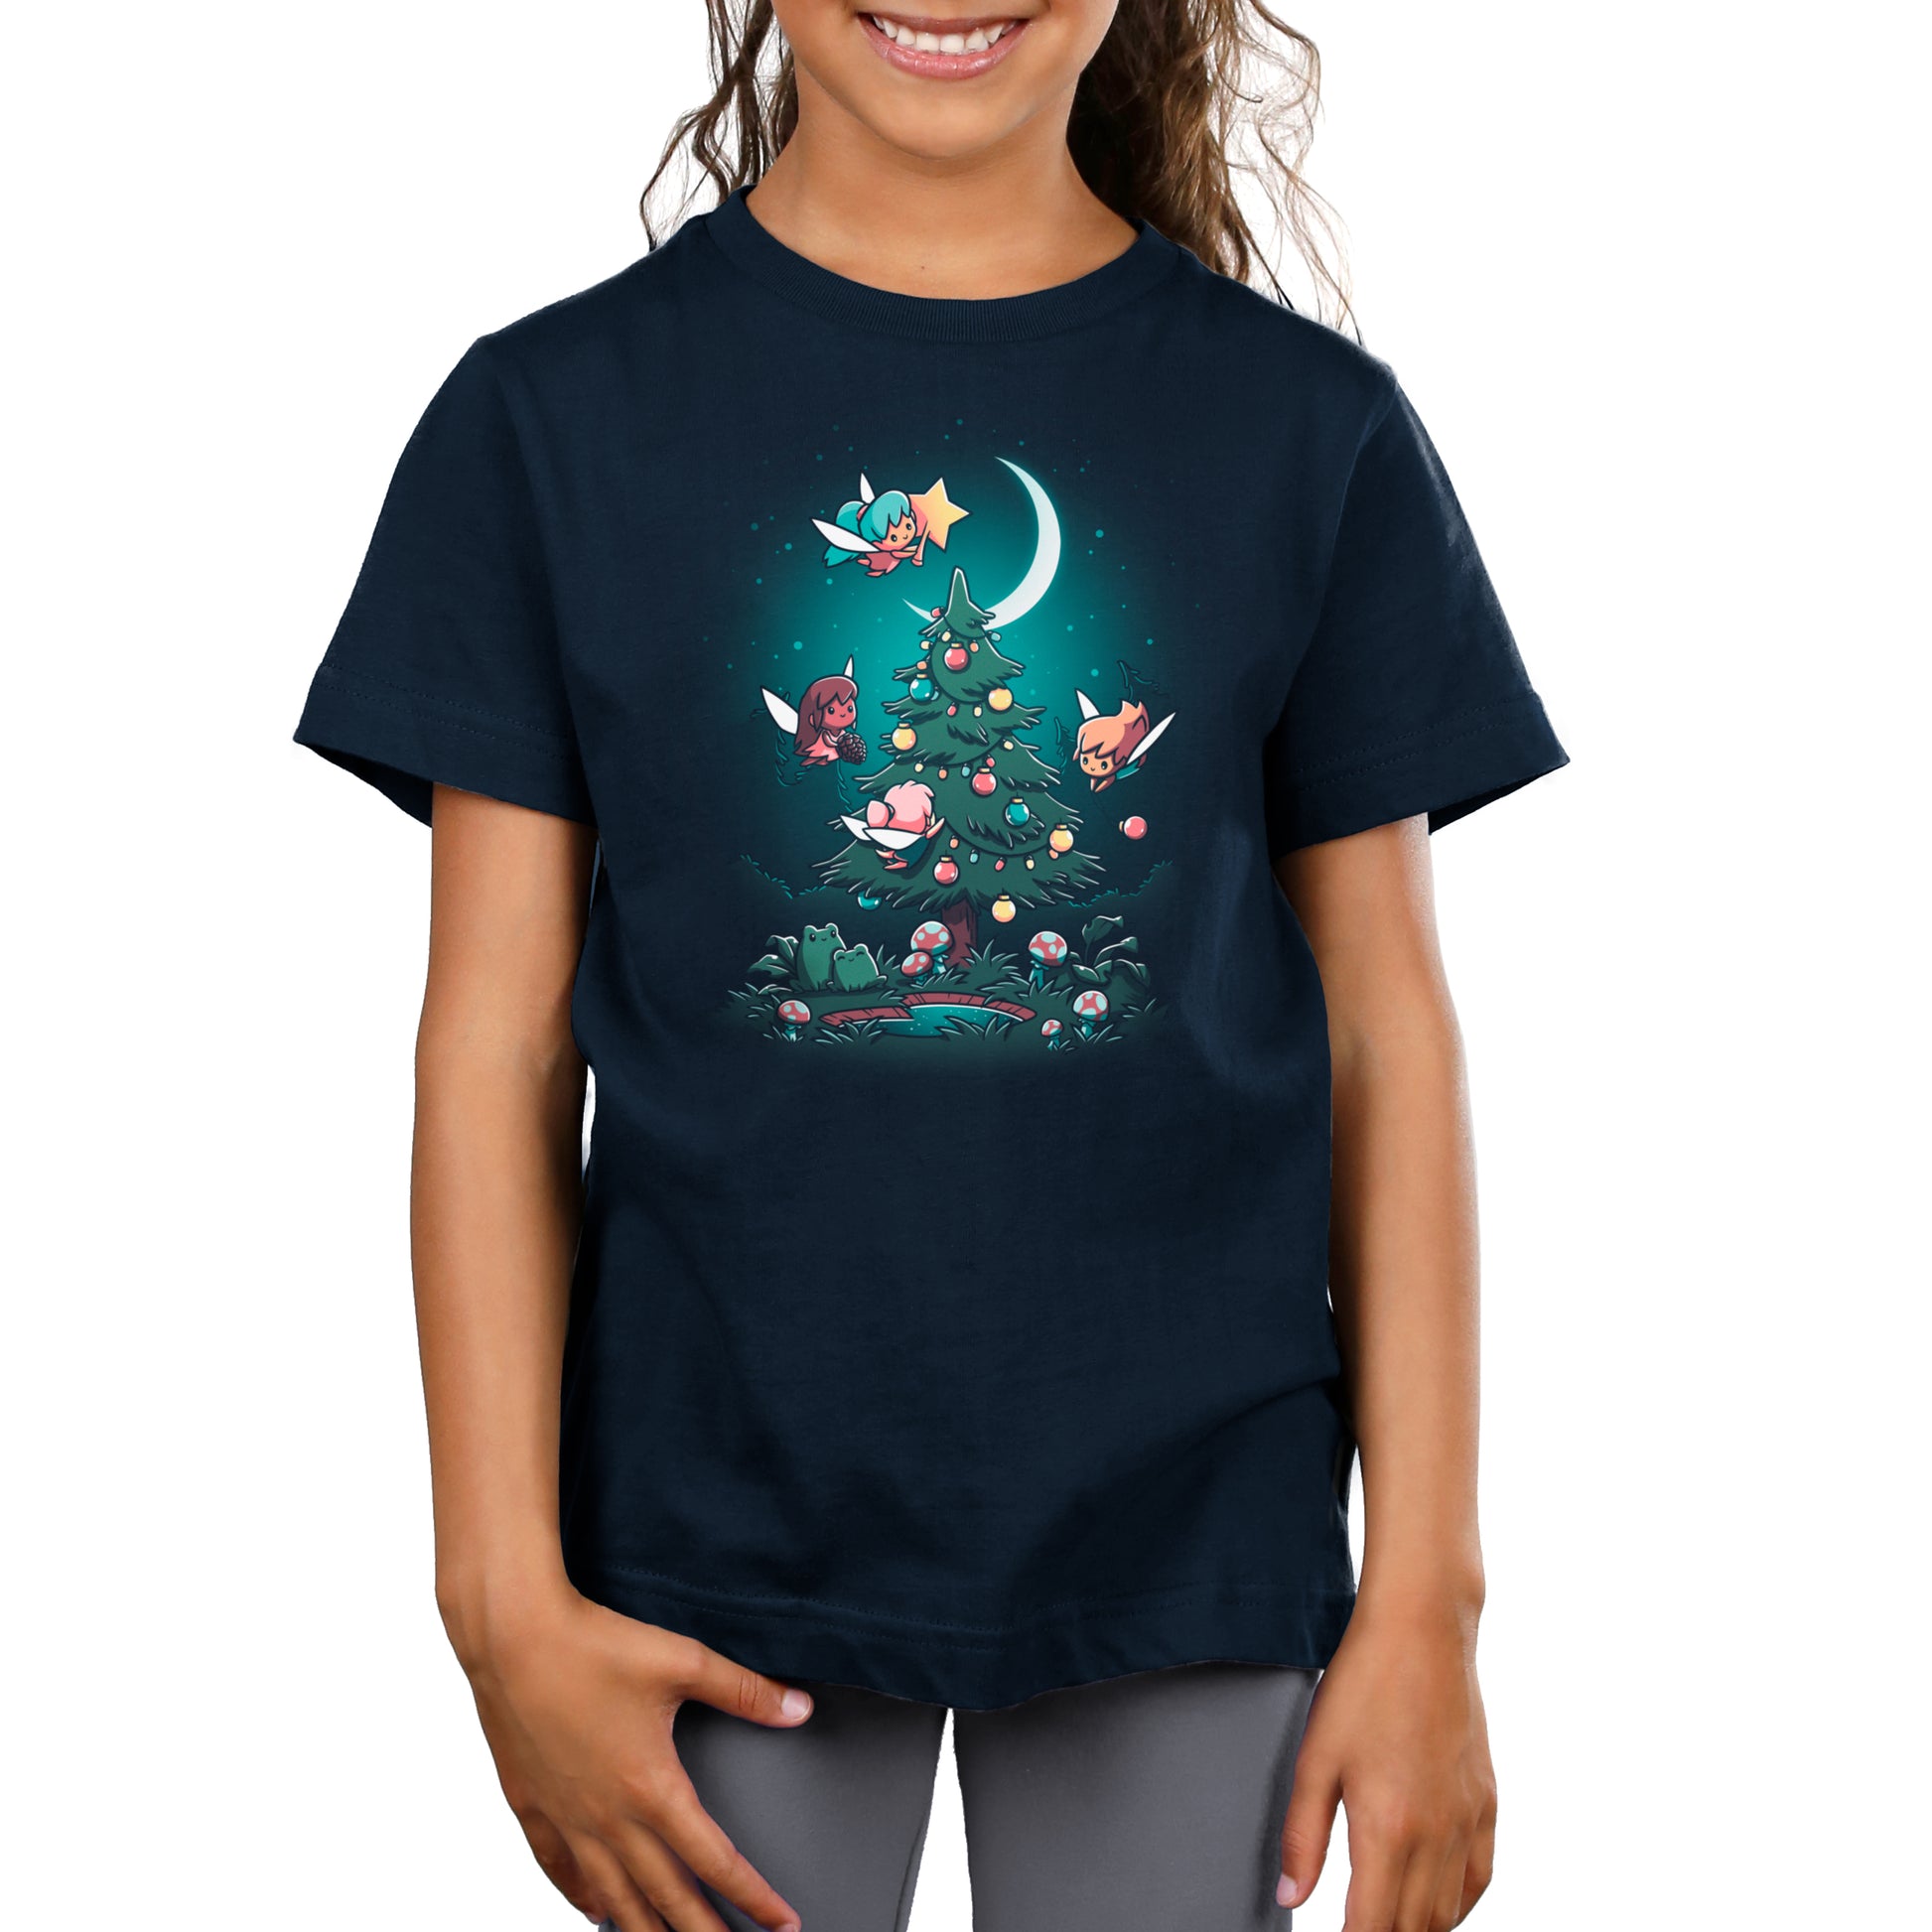 A girl wearing a TeeTurtle navy blue t-shirt with an image of Christmas Fairies.